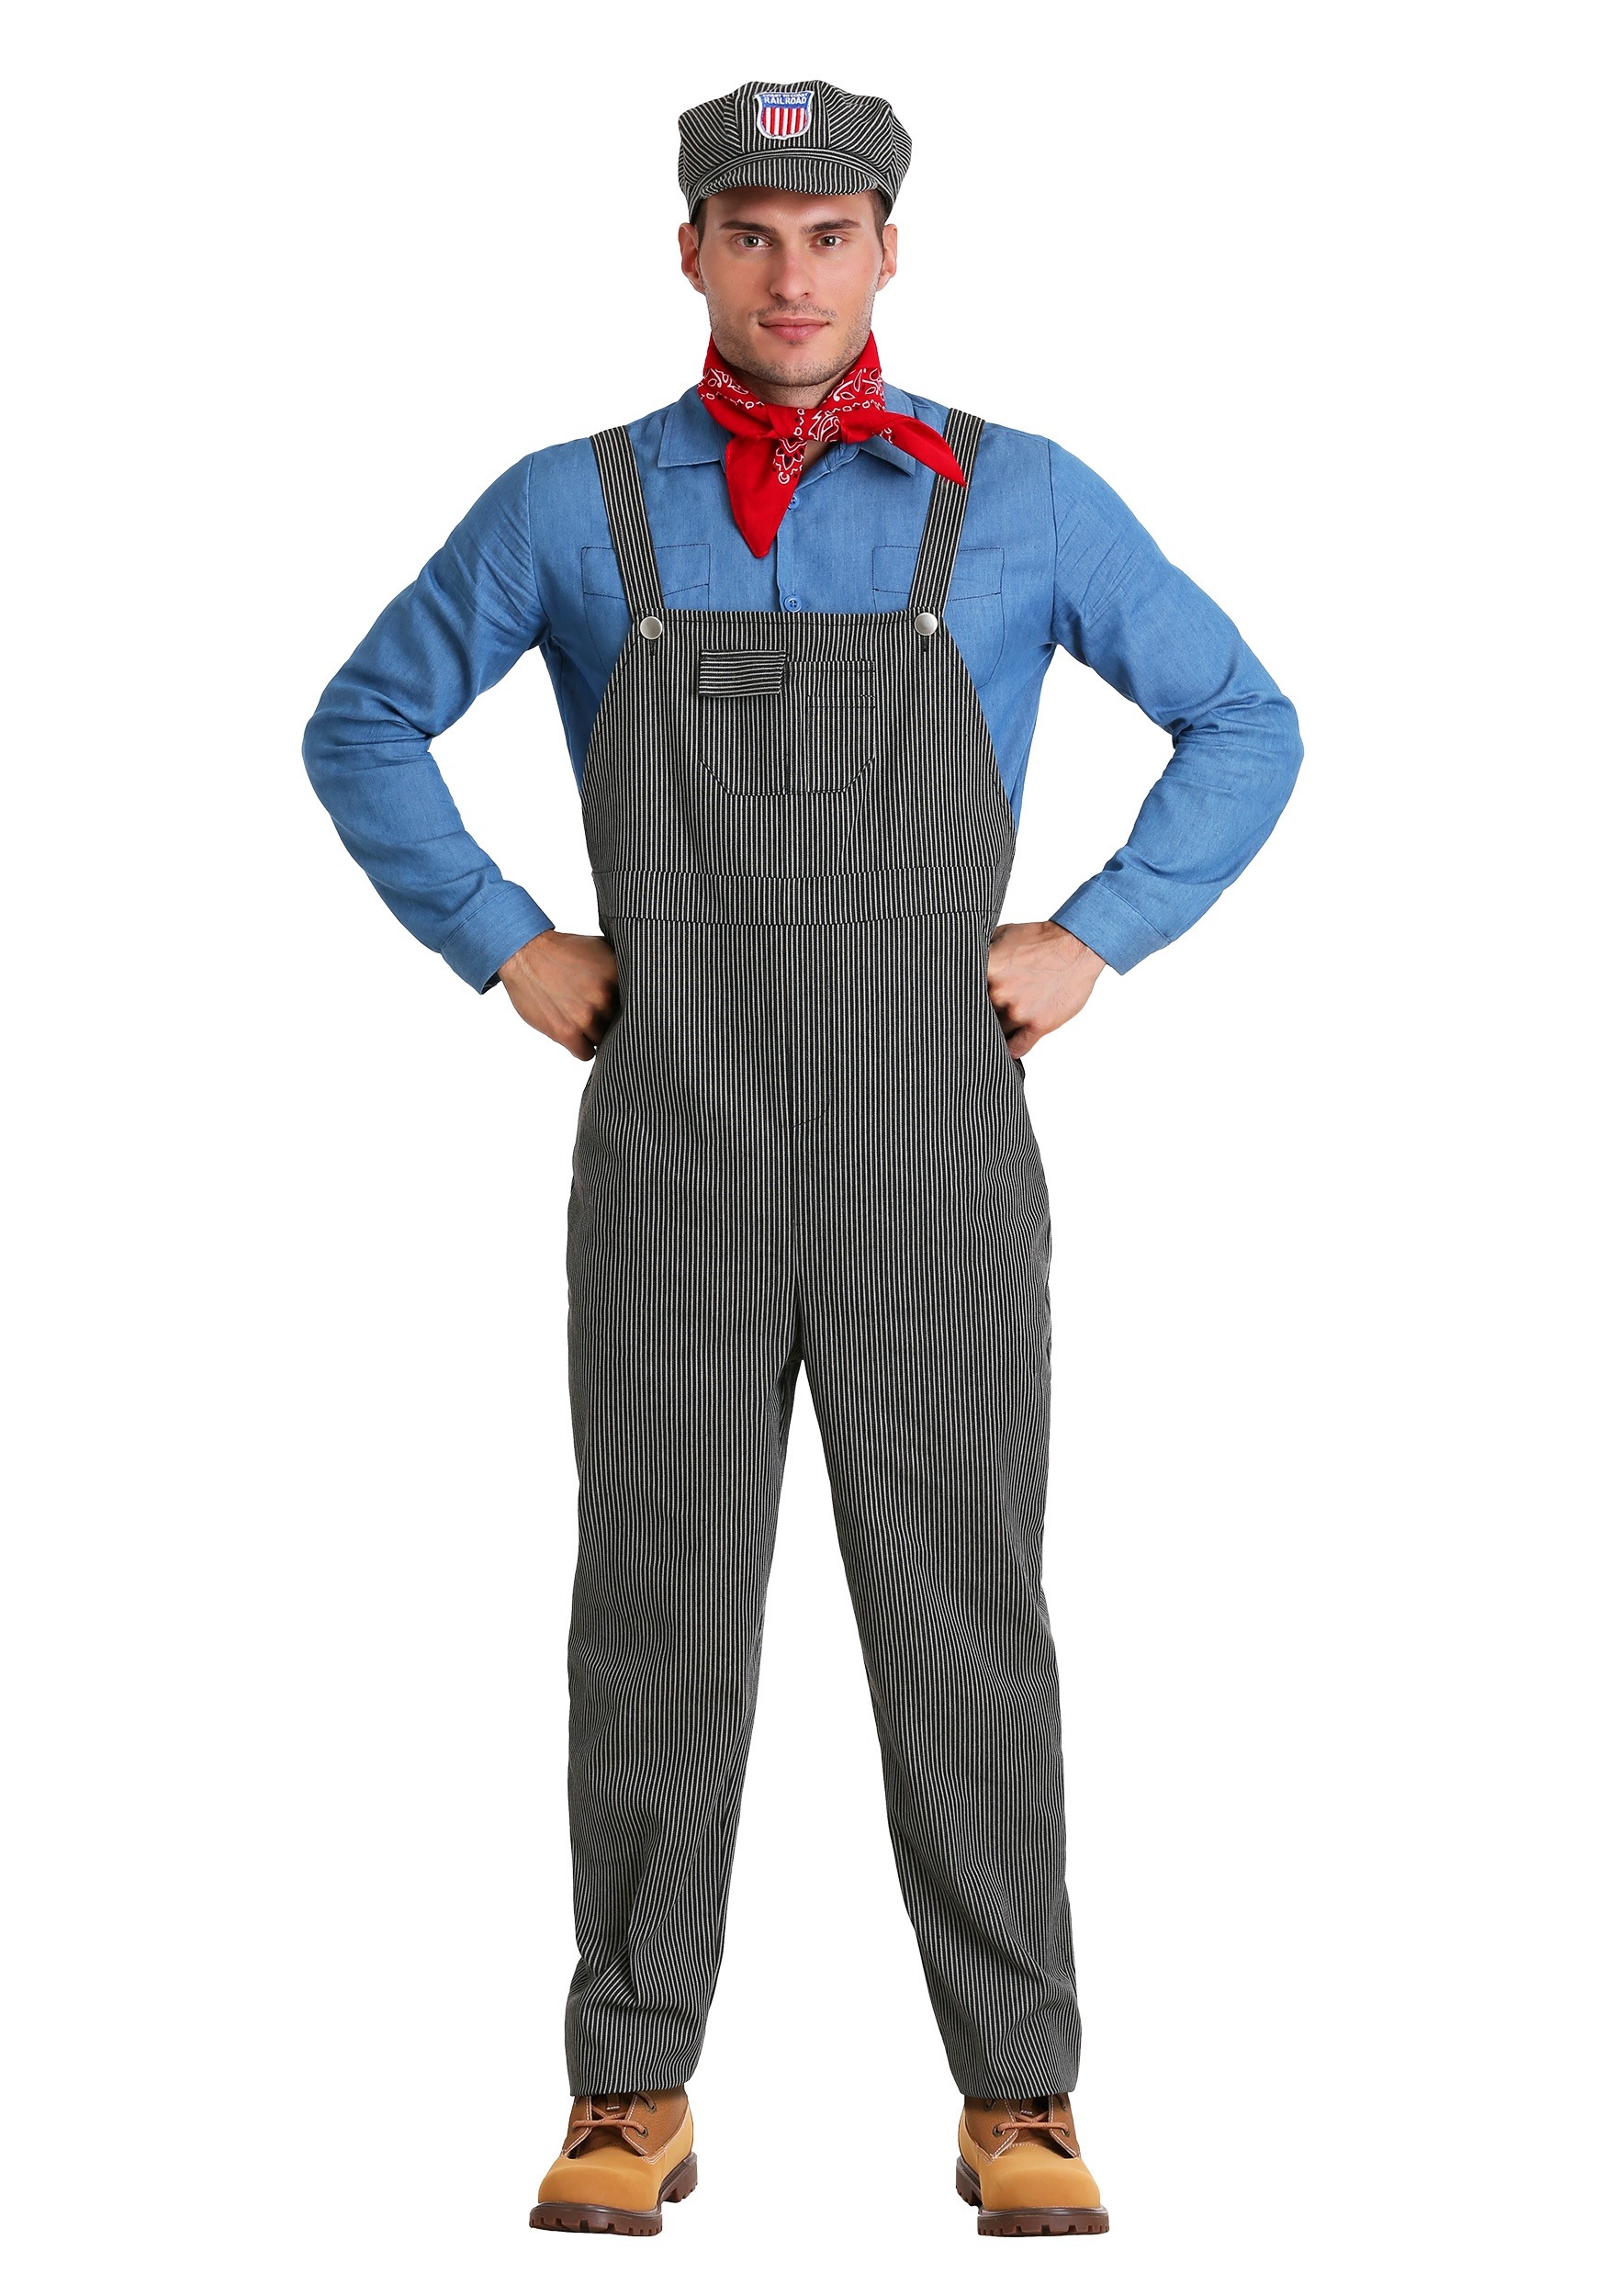 Train Engineer Fancy Dress Costume For Adults